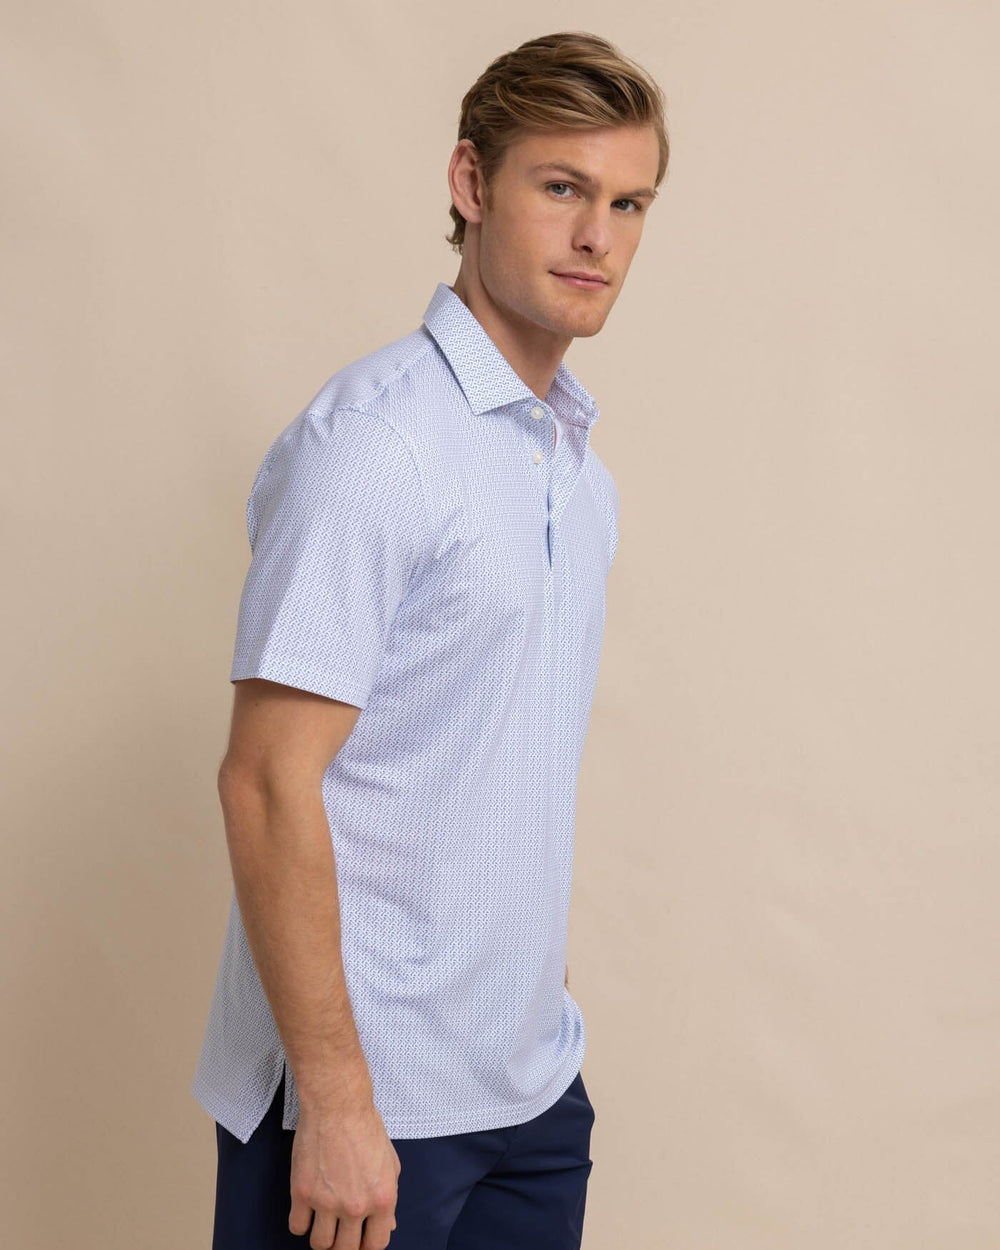 The front view of the Southern Tide Driver Clubbin It Printed Polo by Southern Tide - Classic White